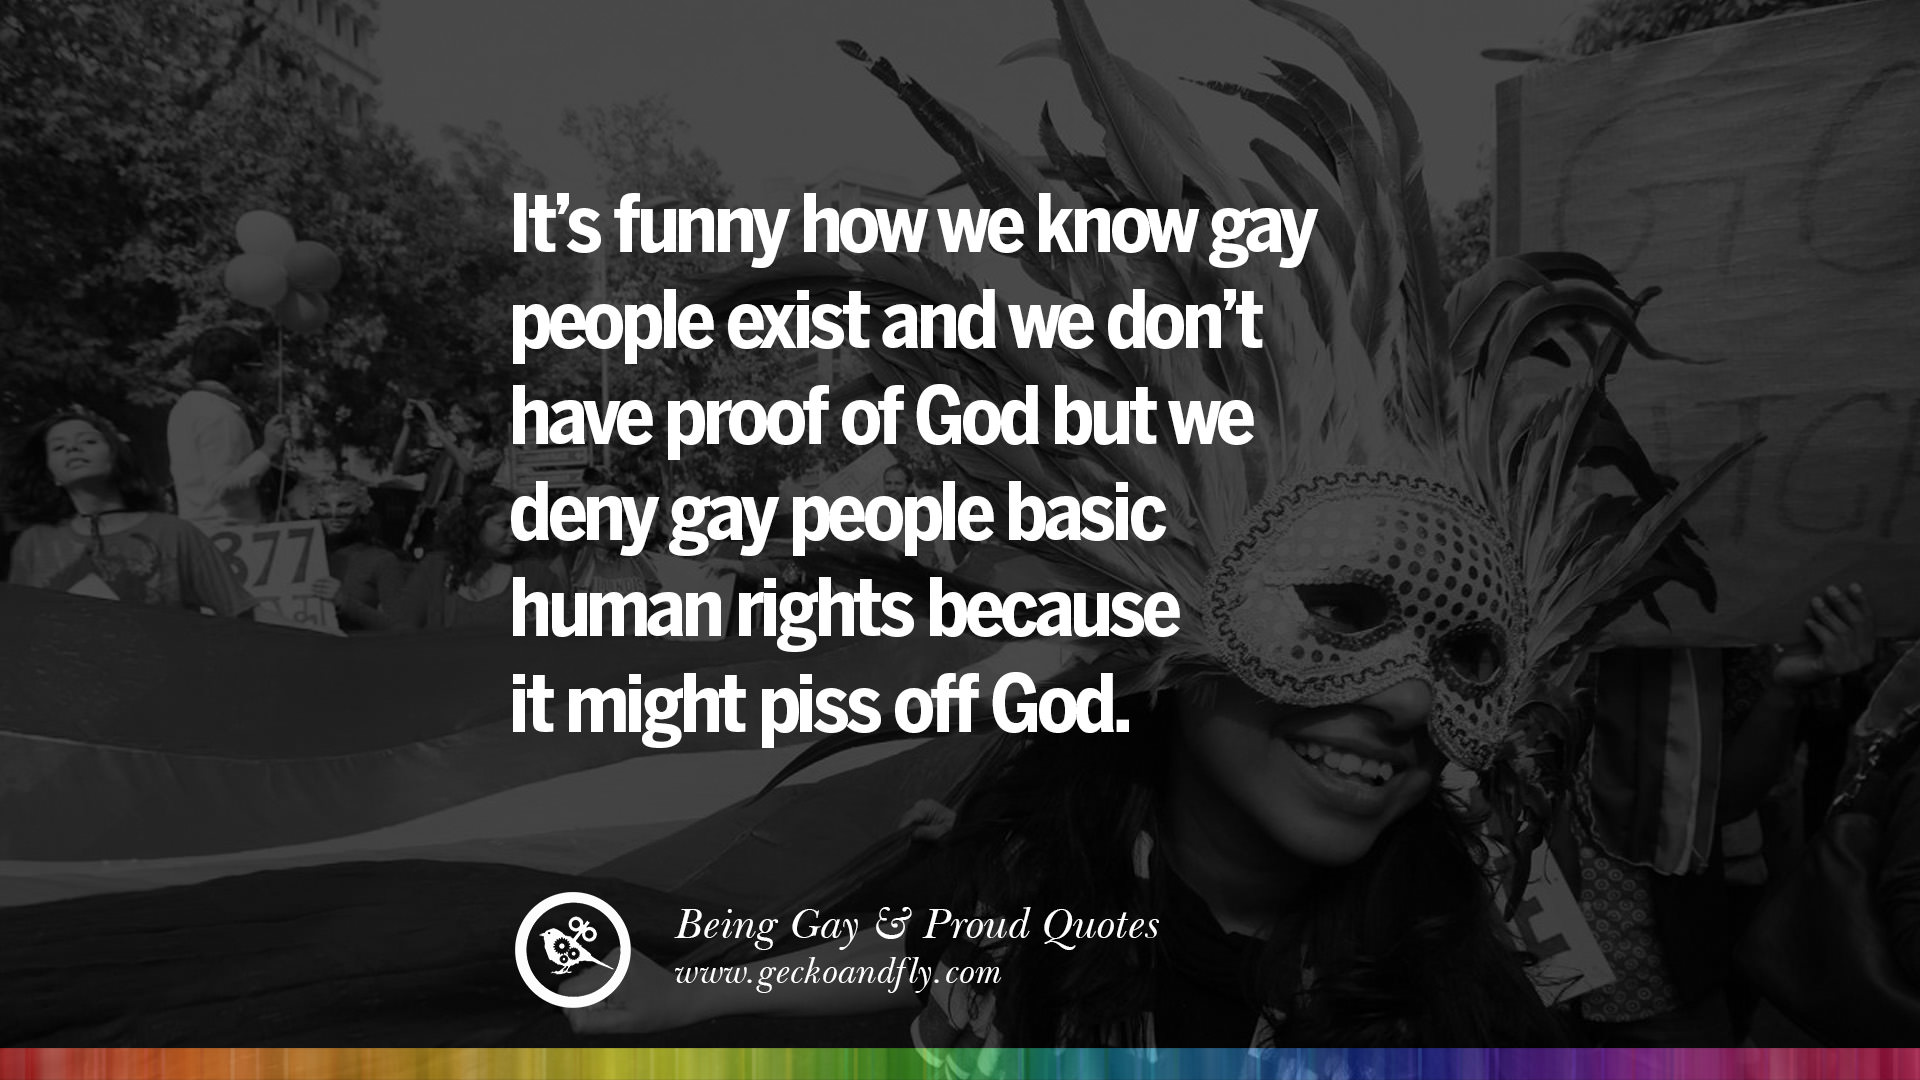 35 Quotes About Gay Pride, Pro LGBT, Homophobia and Marriage